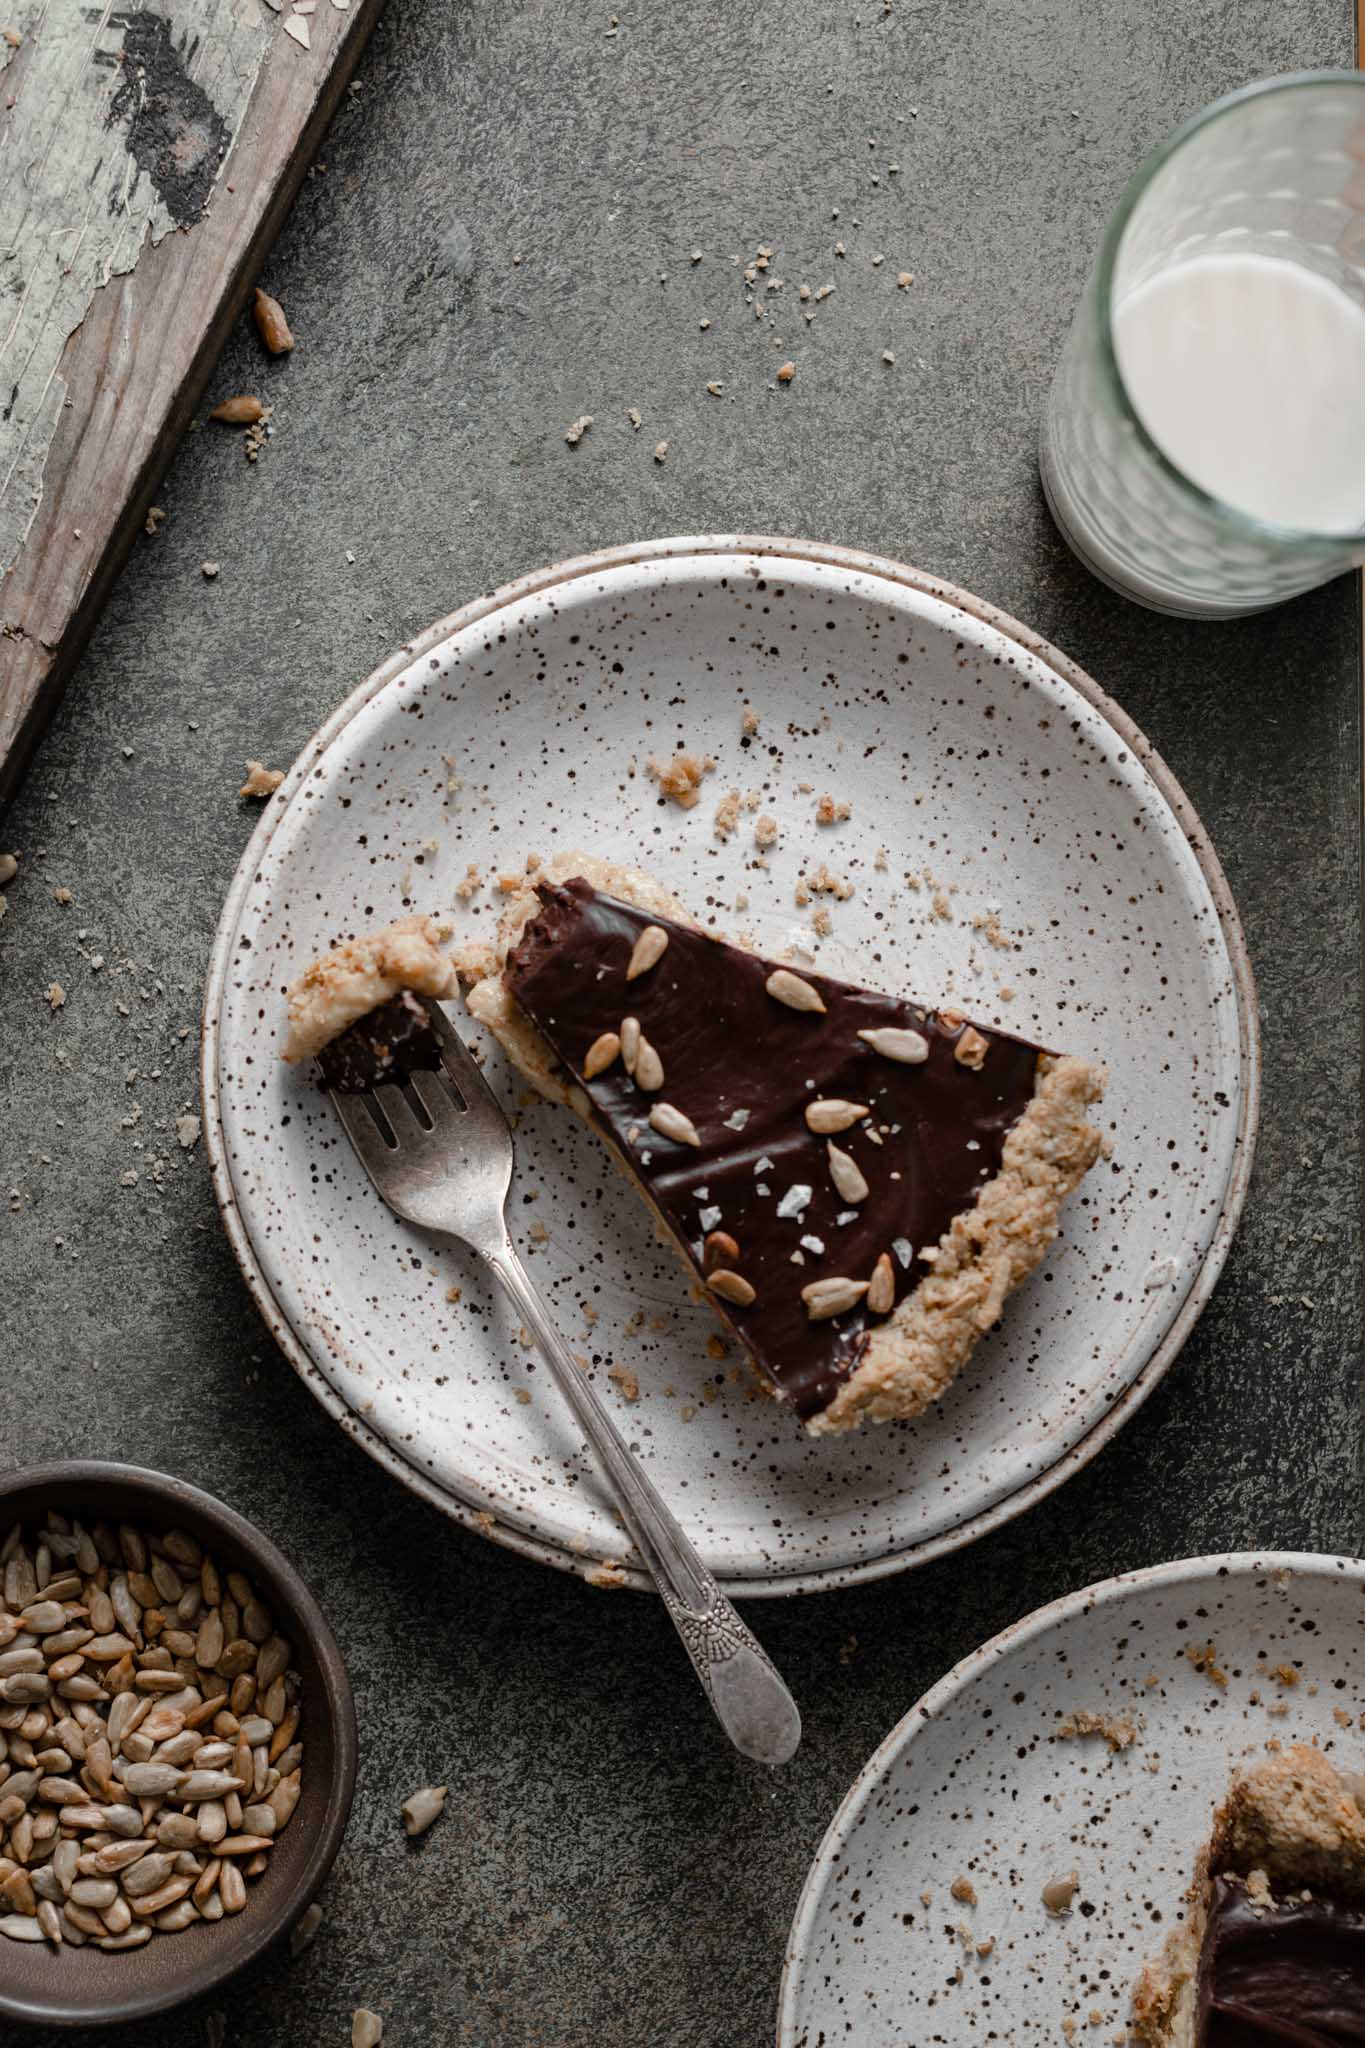 Slice of coconut chocolate tart with toasted sunflower seeds.